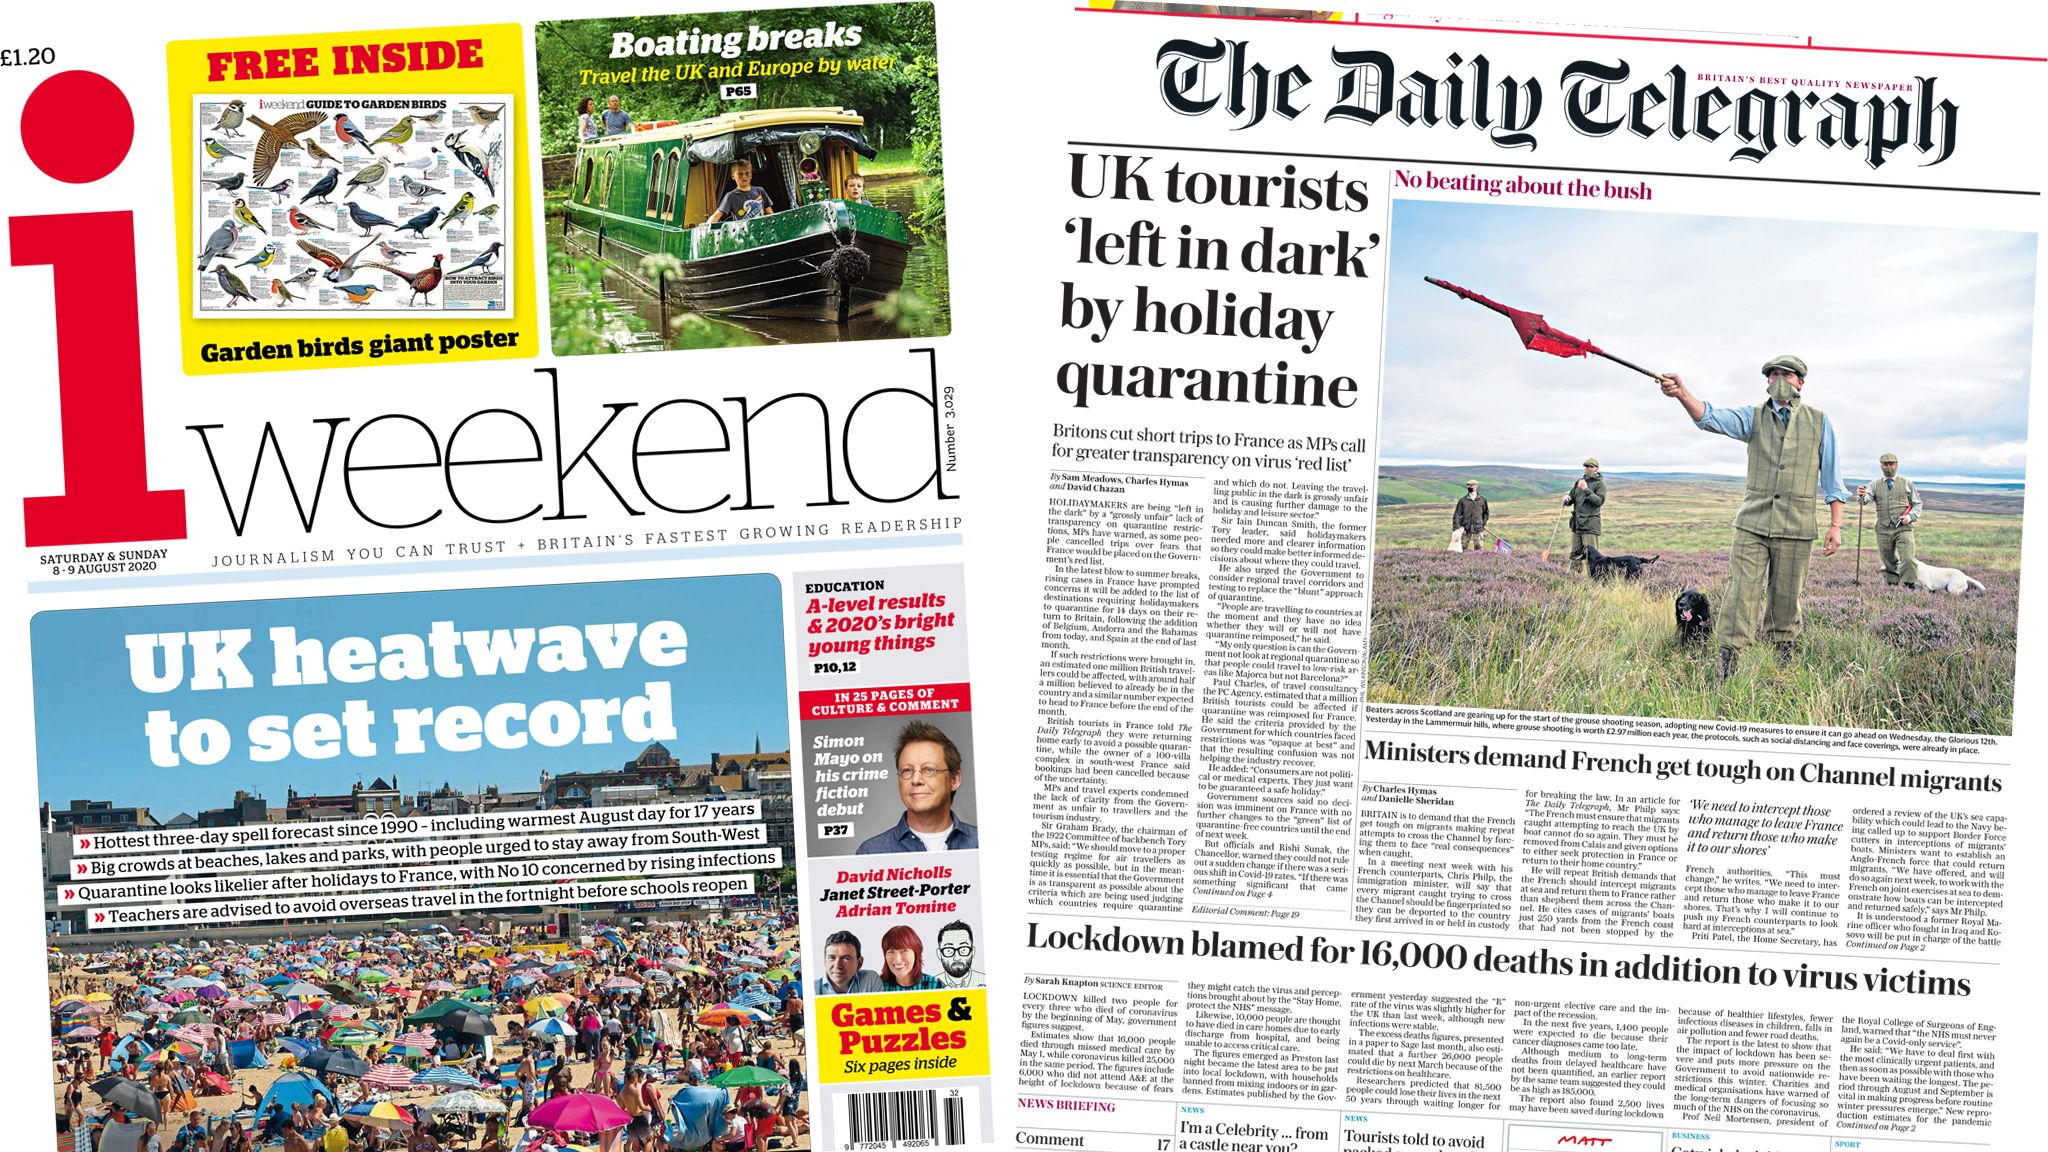 The i and Daily Telegraph front pages